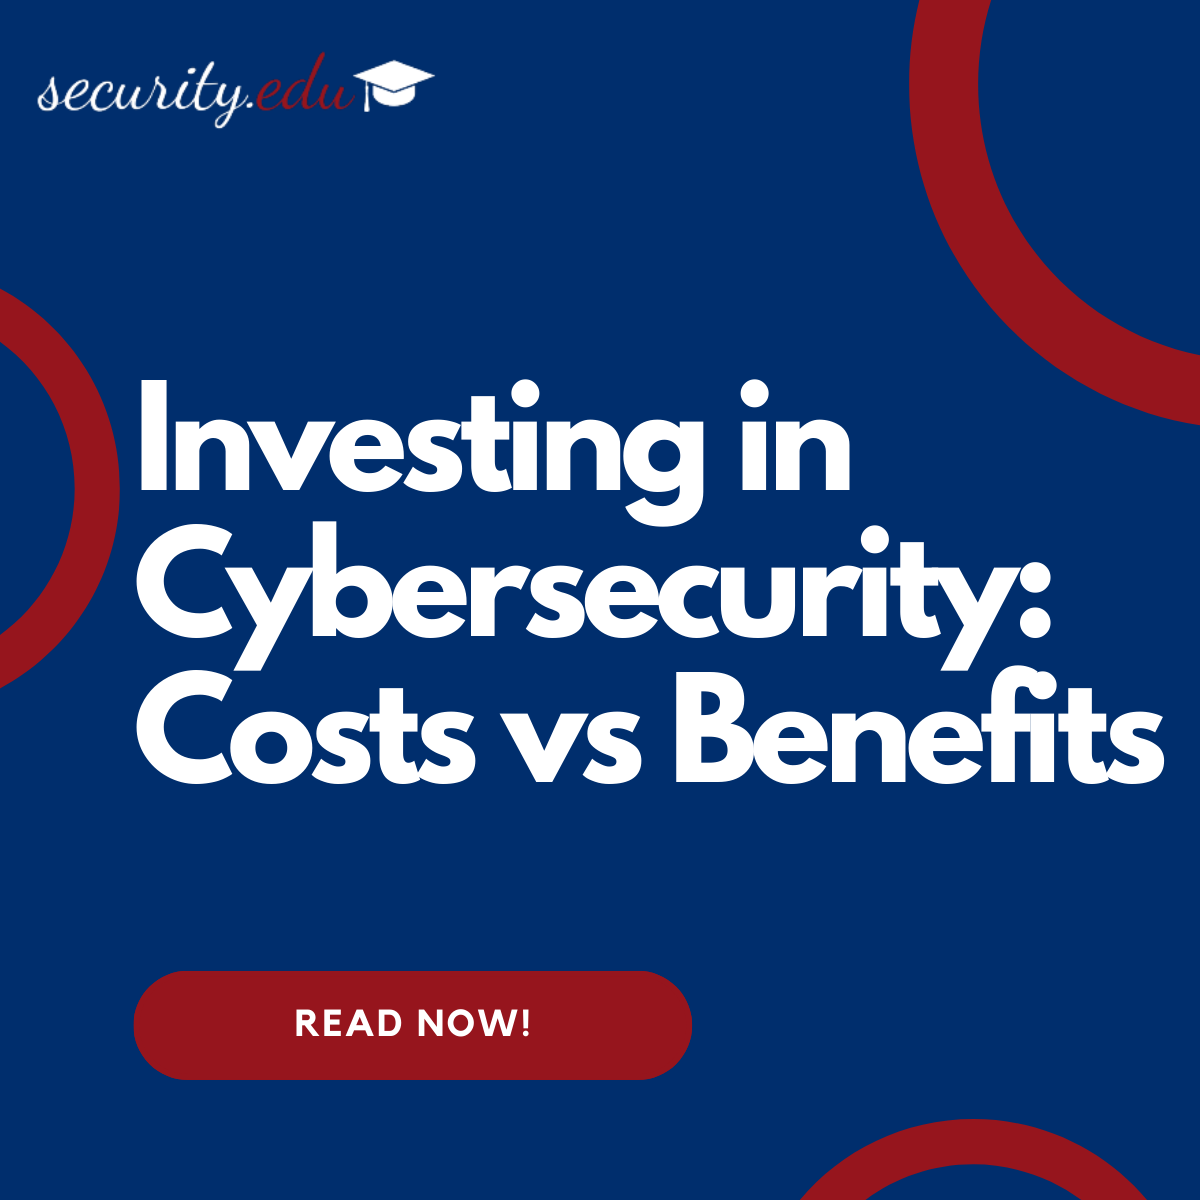 Featured image for “Investing in Cybersecurity: Costs vs Benefits”